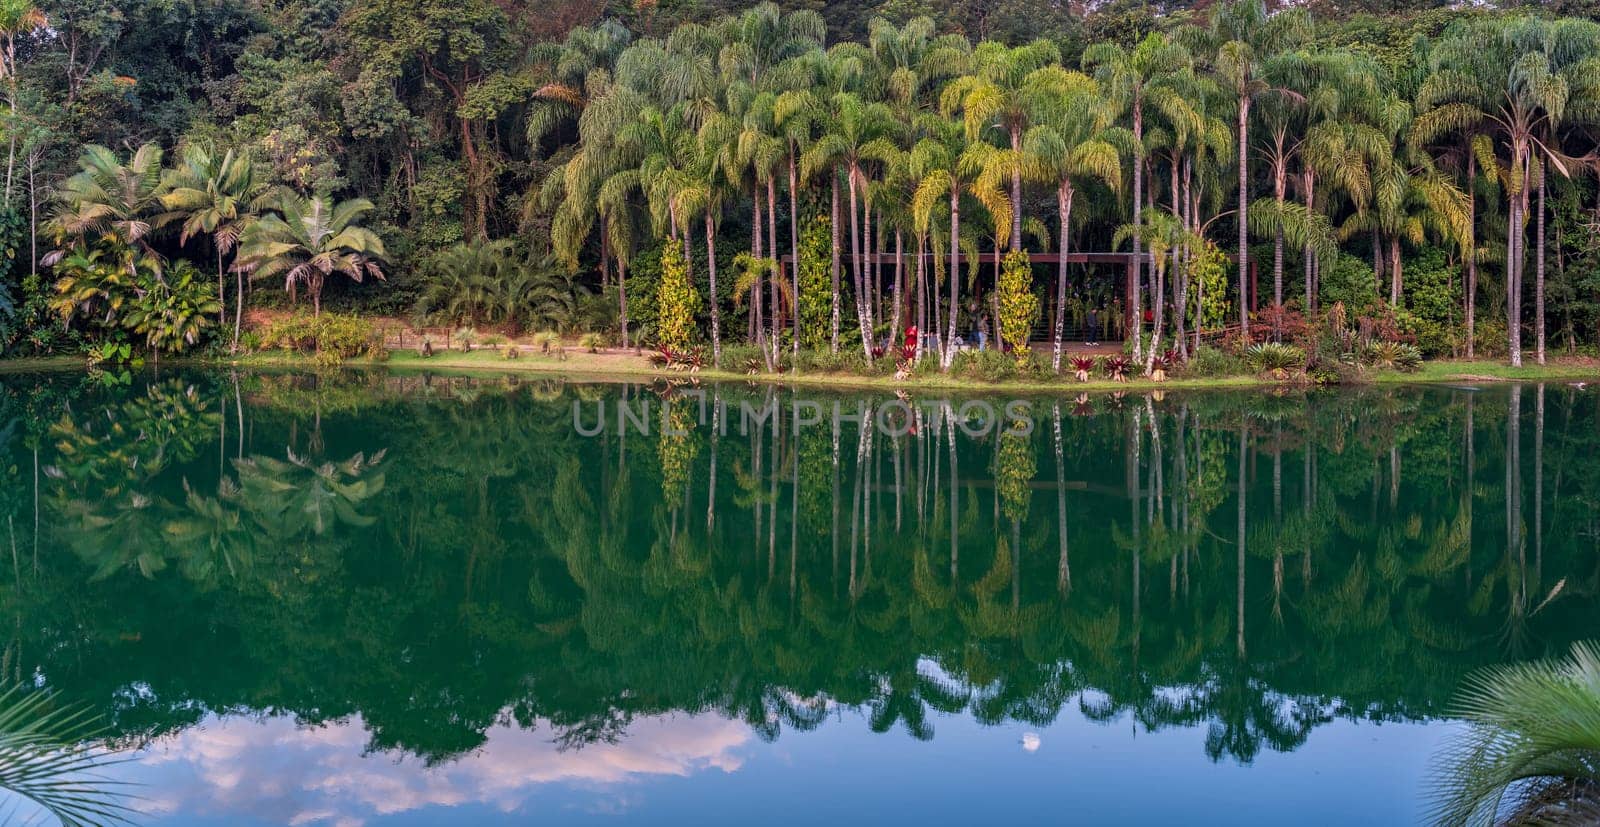 Serene Tropical Paradise Reflected in Calm Lake Waters by FerradalFCG